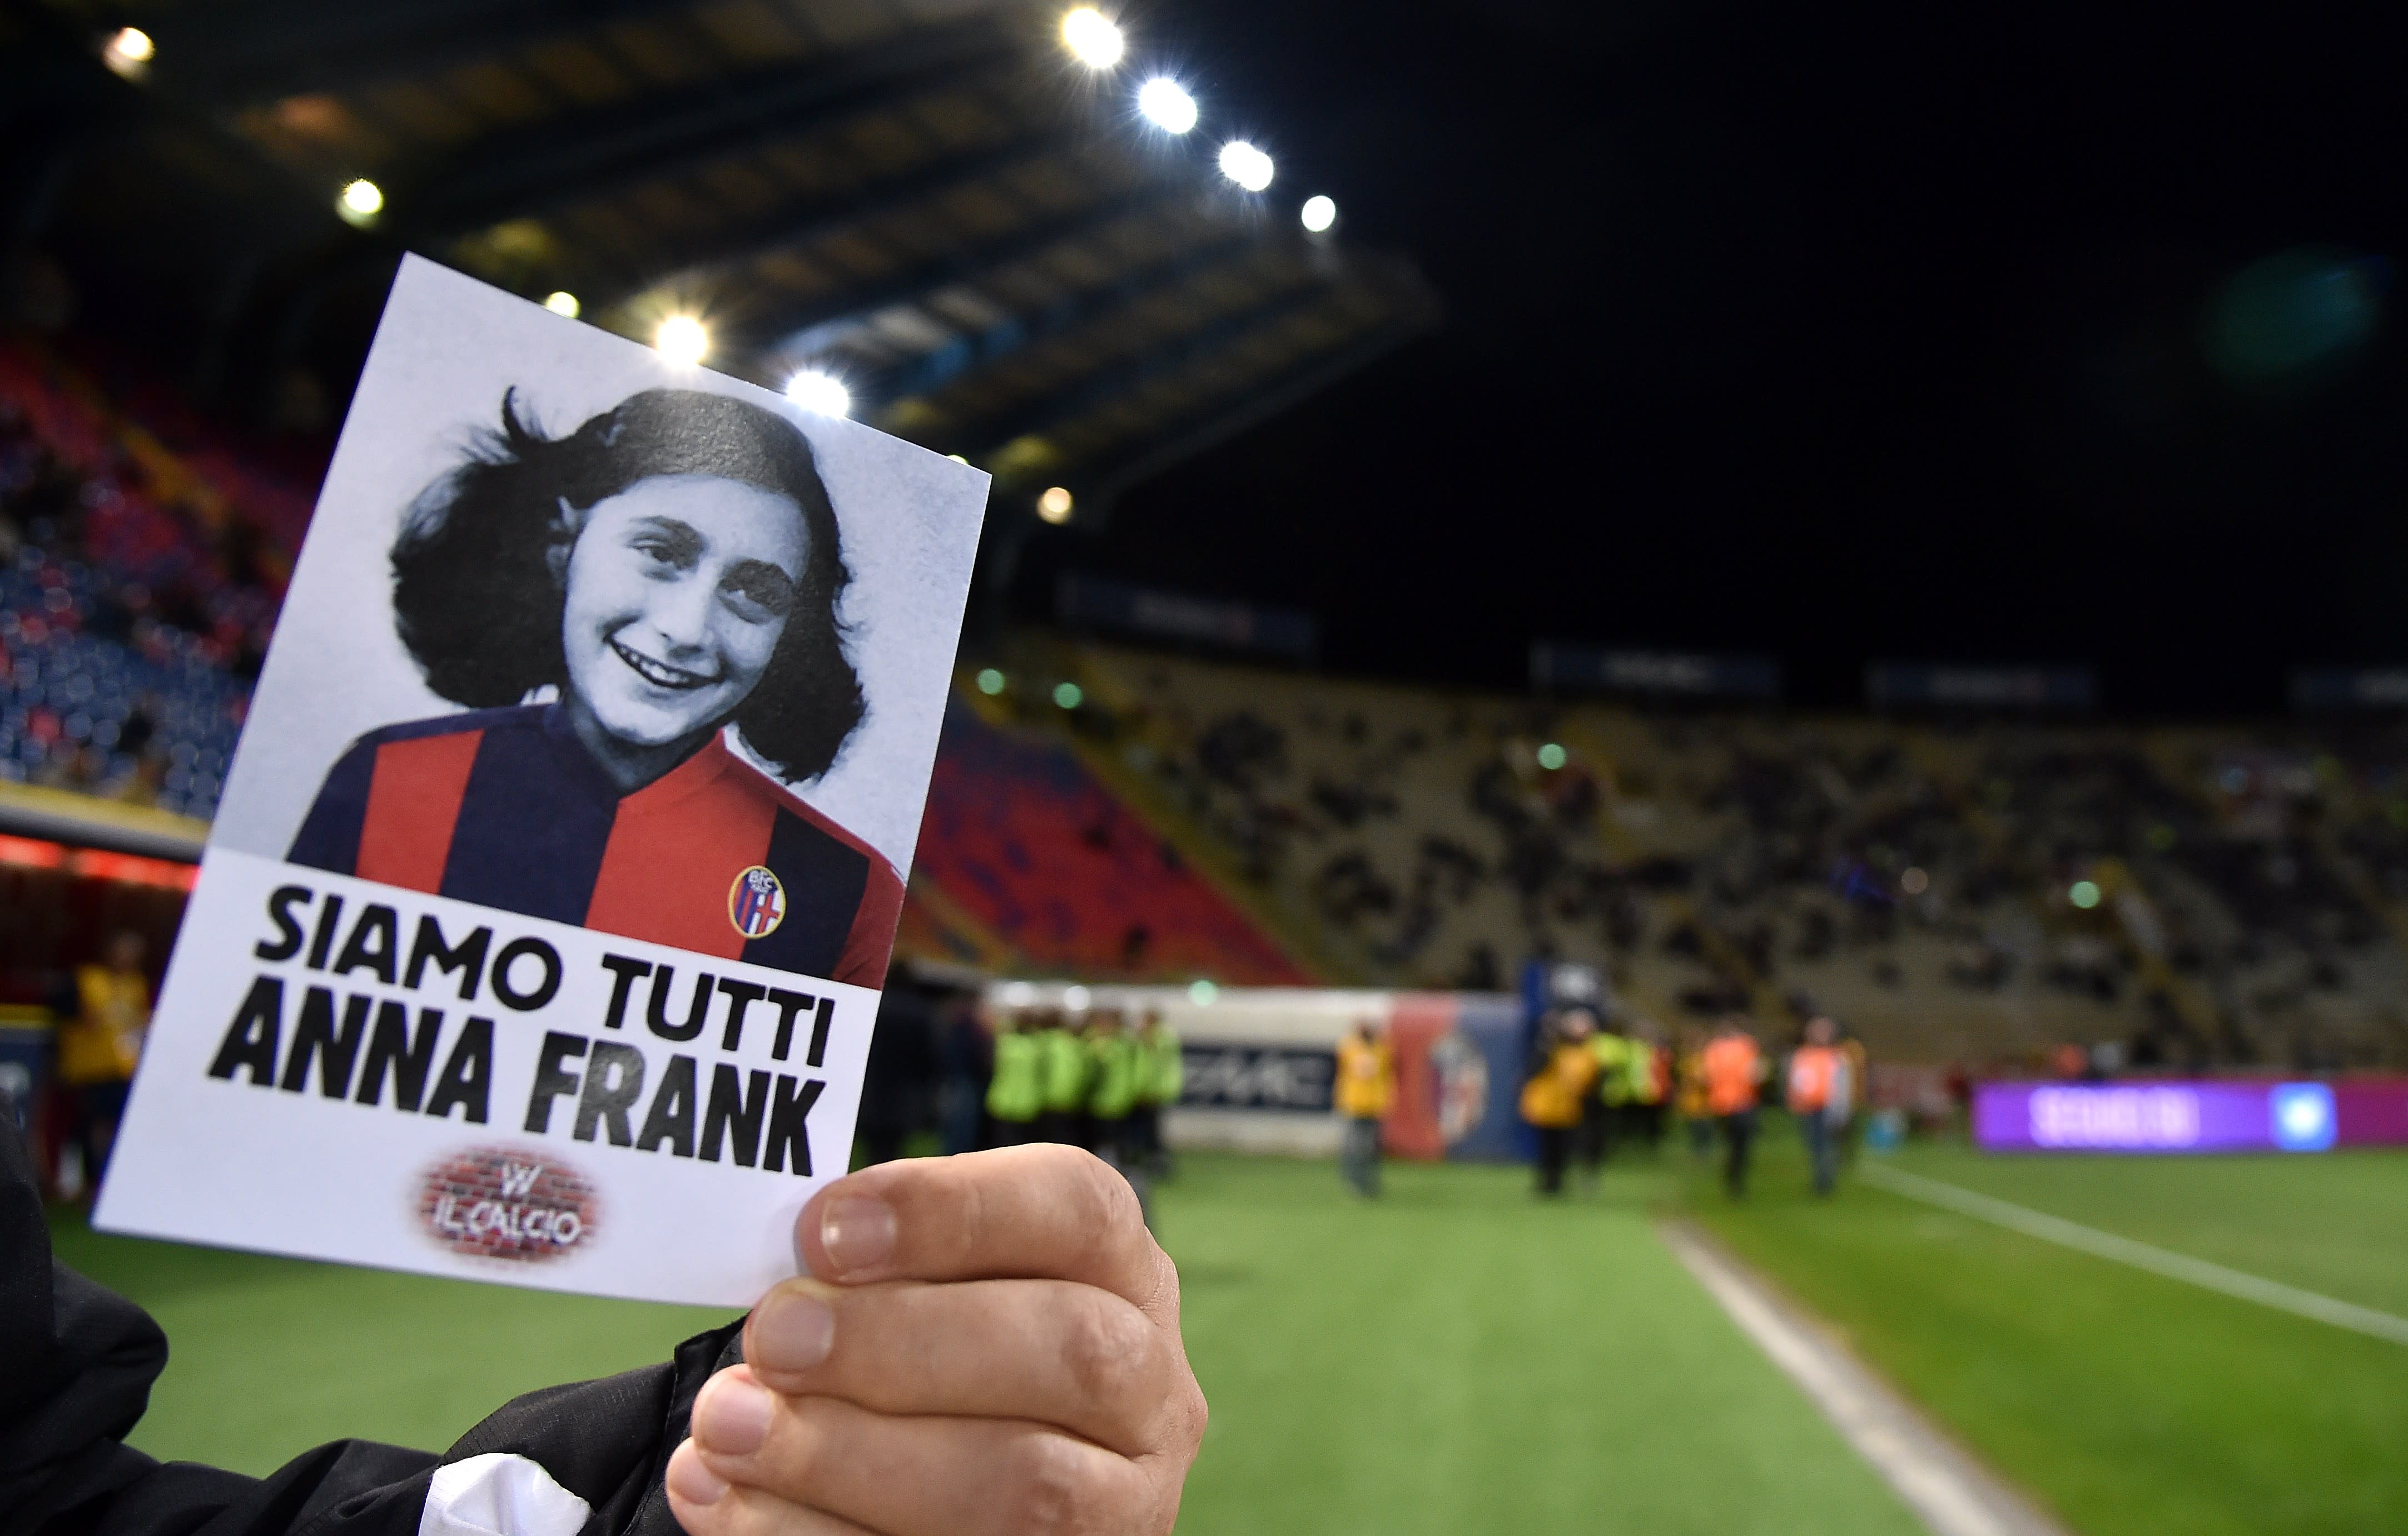 A picture of Anne Frank is held ahead of a match between Bologna and Lazio at Stadio Renato Dall'Ara, Bologna, Italy, October 25, 2017 (REUTERS/ALBERTO LINGRIA)